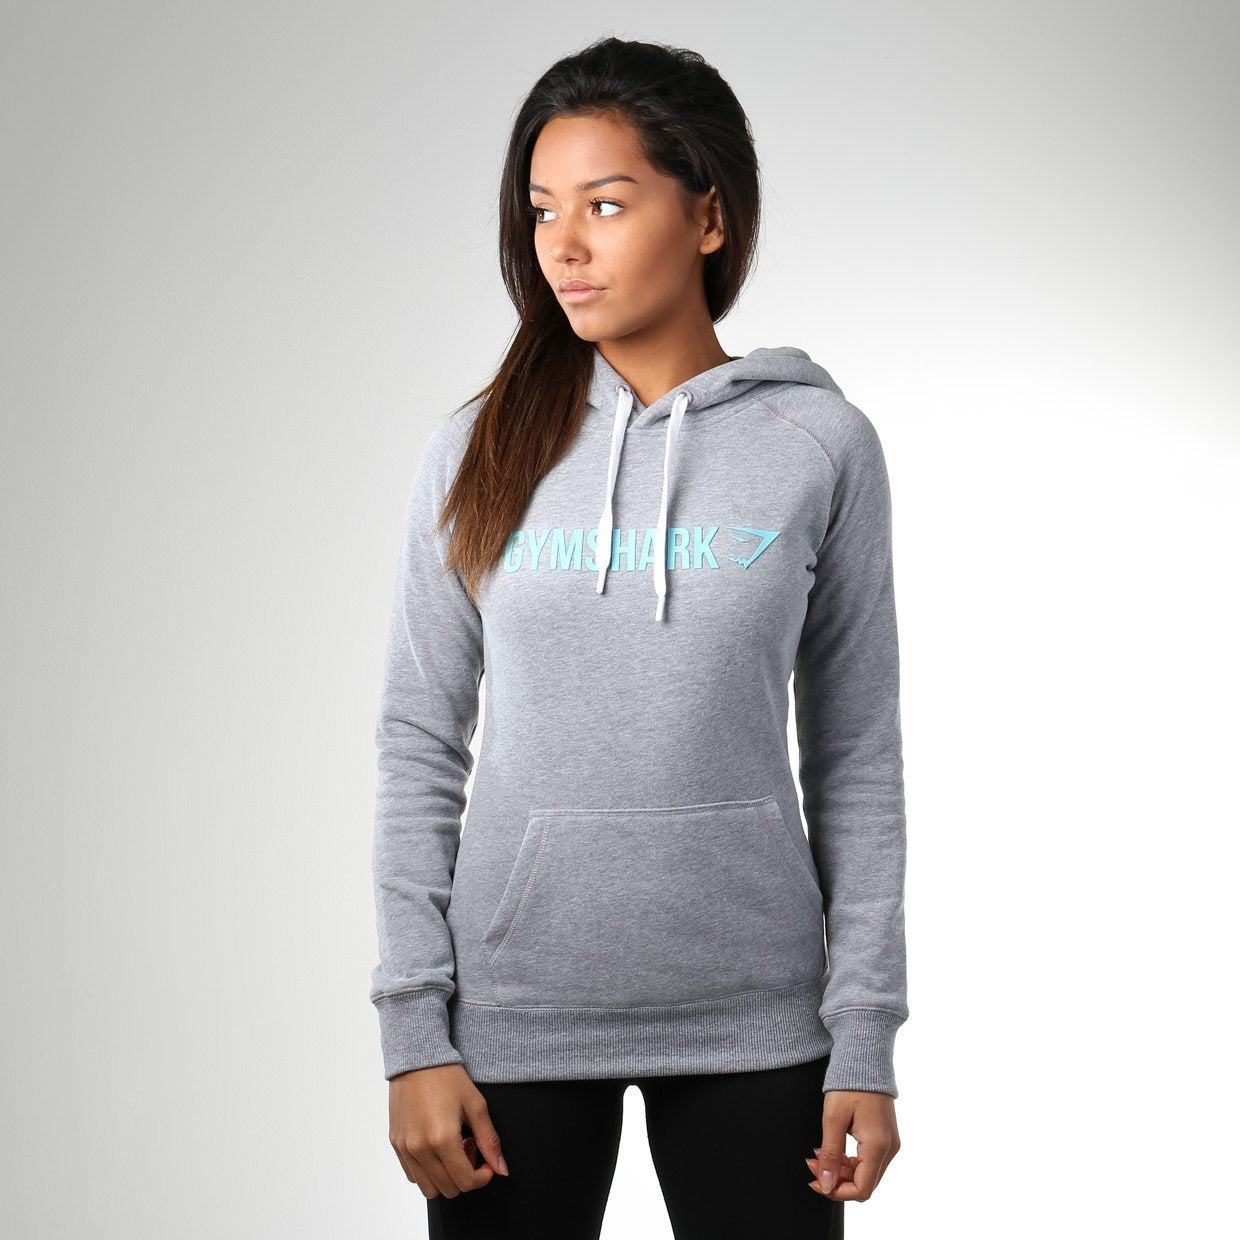 Signal Hooded Pullover in Light Grey Marl/Sea Green - view 1